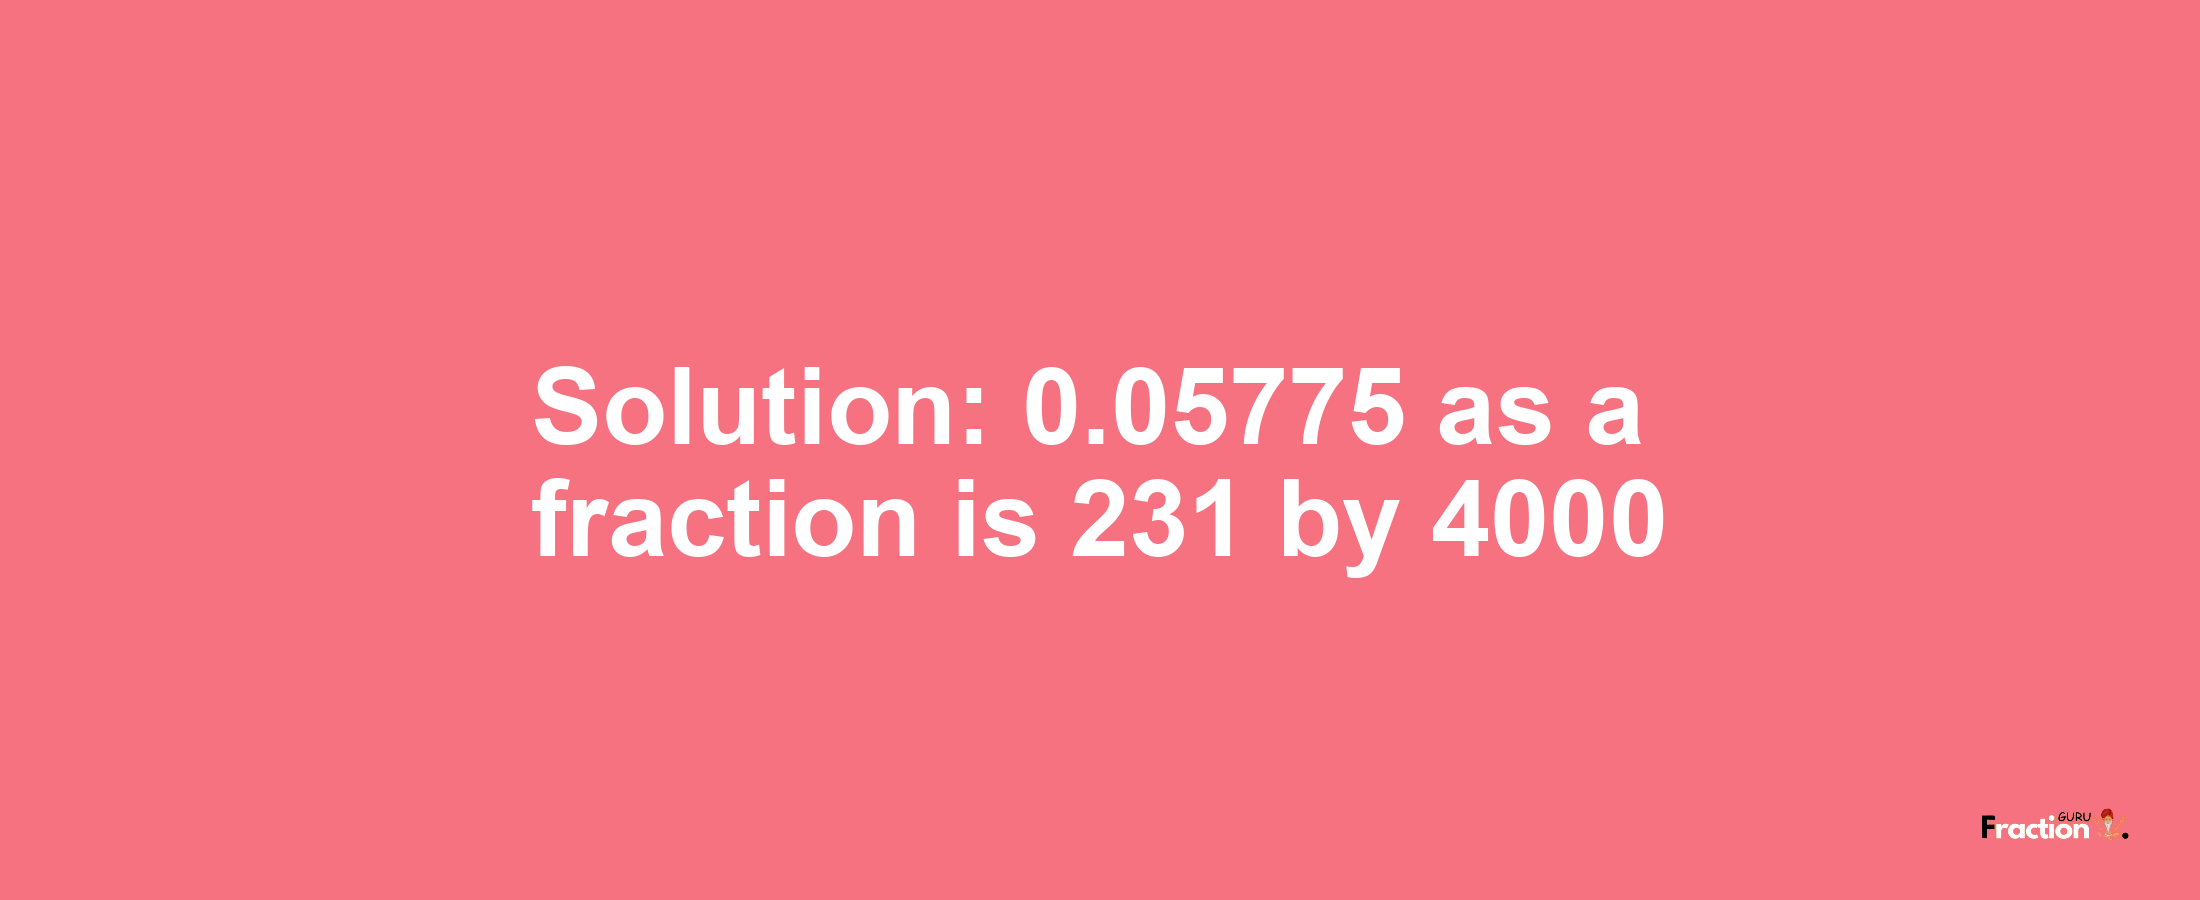 Solution:0.05775 as a fraction is 231/4000